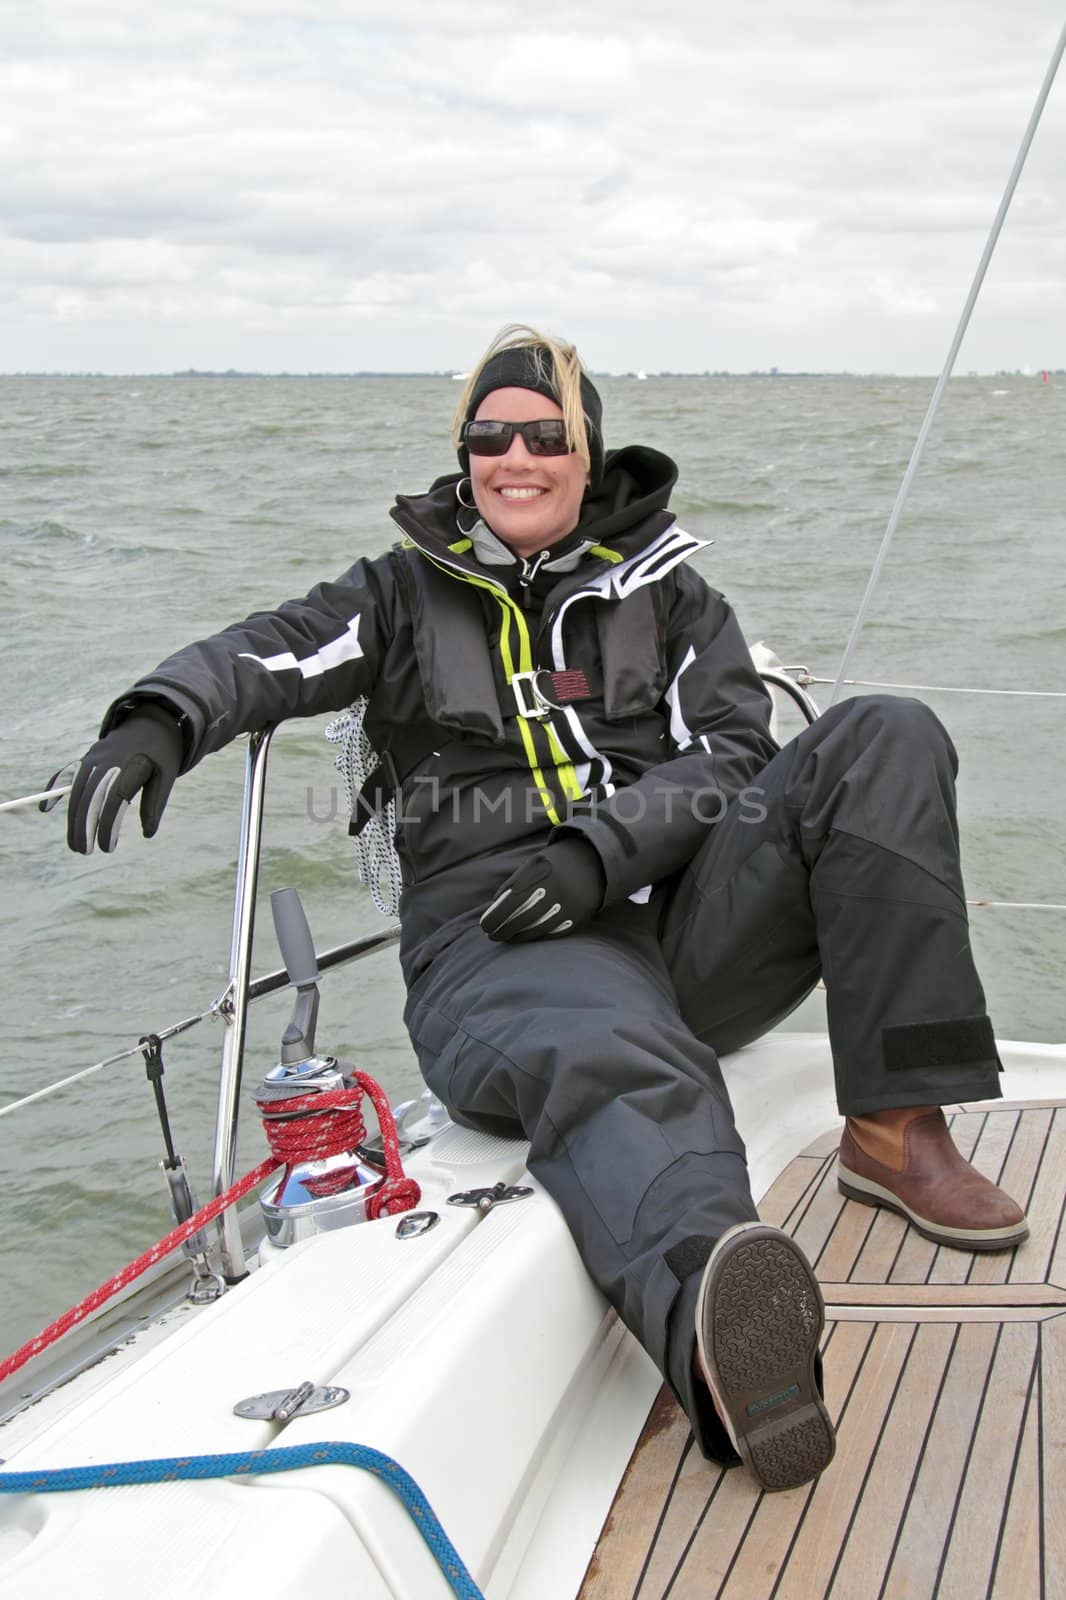 Relaxing during sailing on the IJsselmeer in the Netherlands by devy